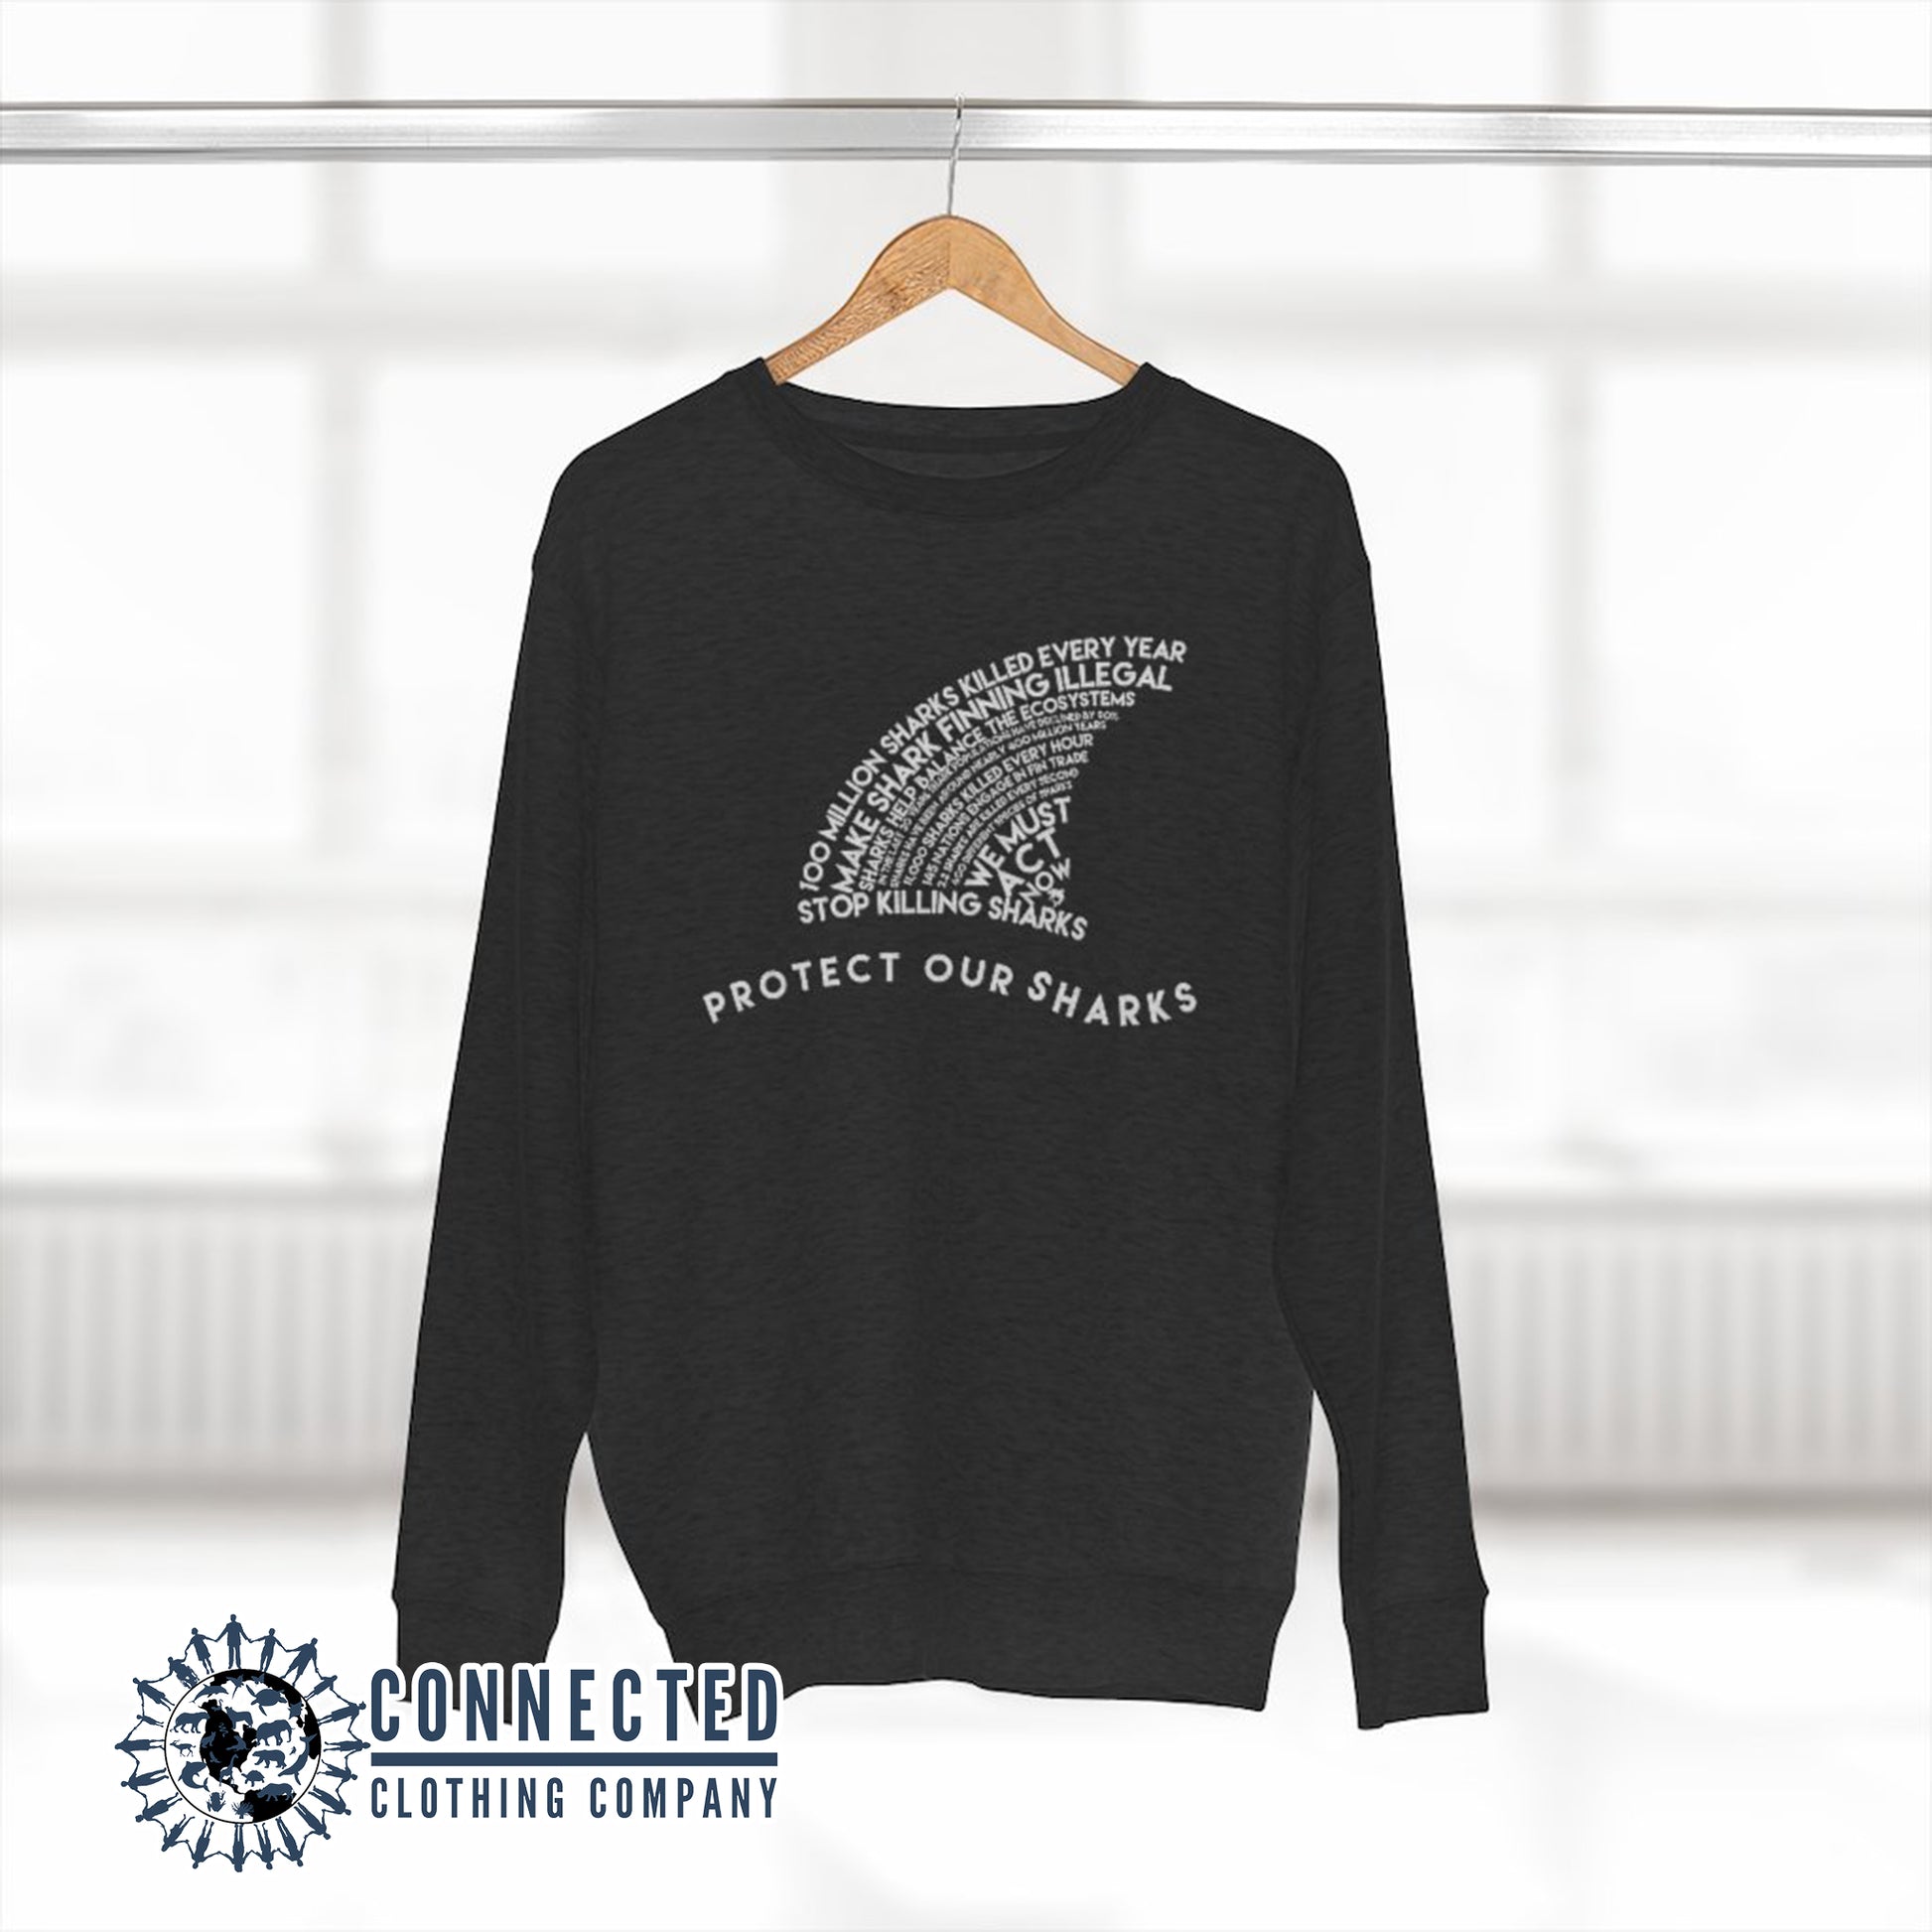 Charcoal Heather Protect Our Sharks Unisex Crewneck Sweatshirt - sweetsherriloudesigns - Ethically and Sustainably Made - 10% of profits donated to shark conservation and ocean conservation